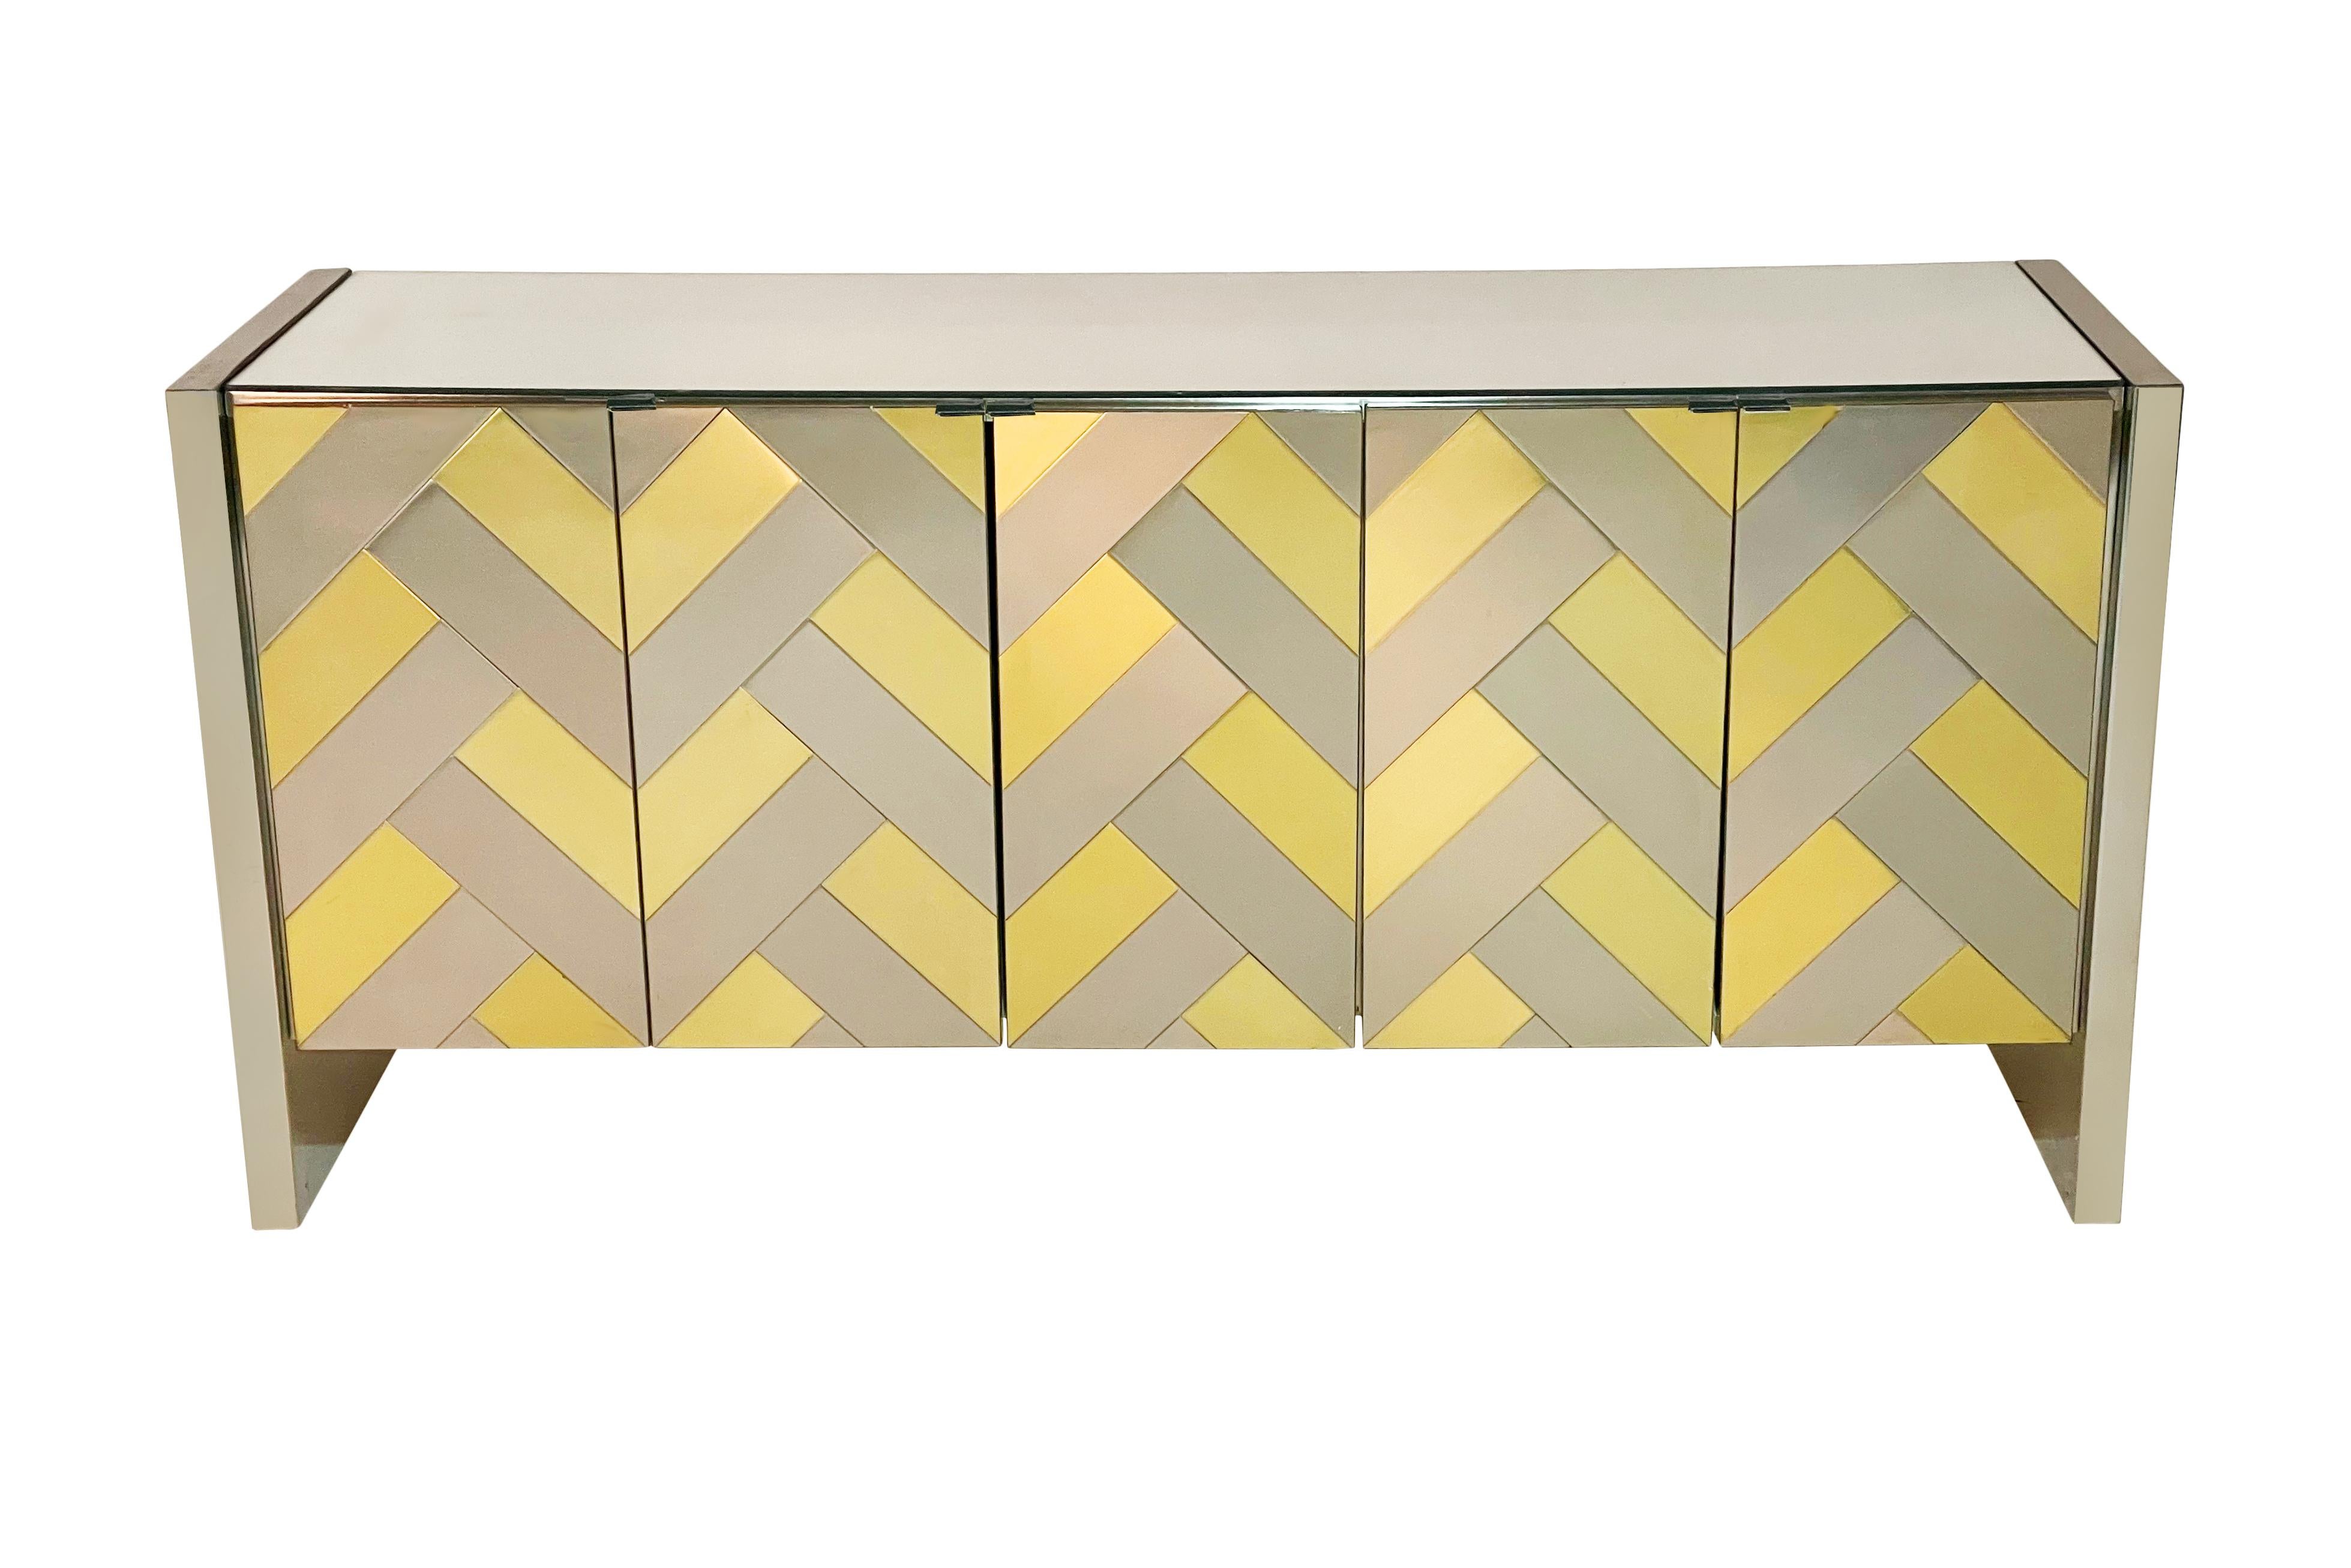 Late 20th Century Mid-Century Modern Brass & Brushed Steel Herringbone Credenza or Cabinet by Ello For Sale